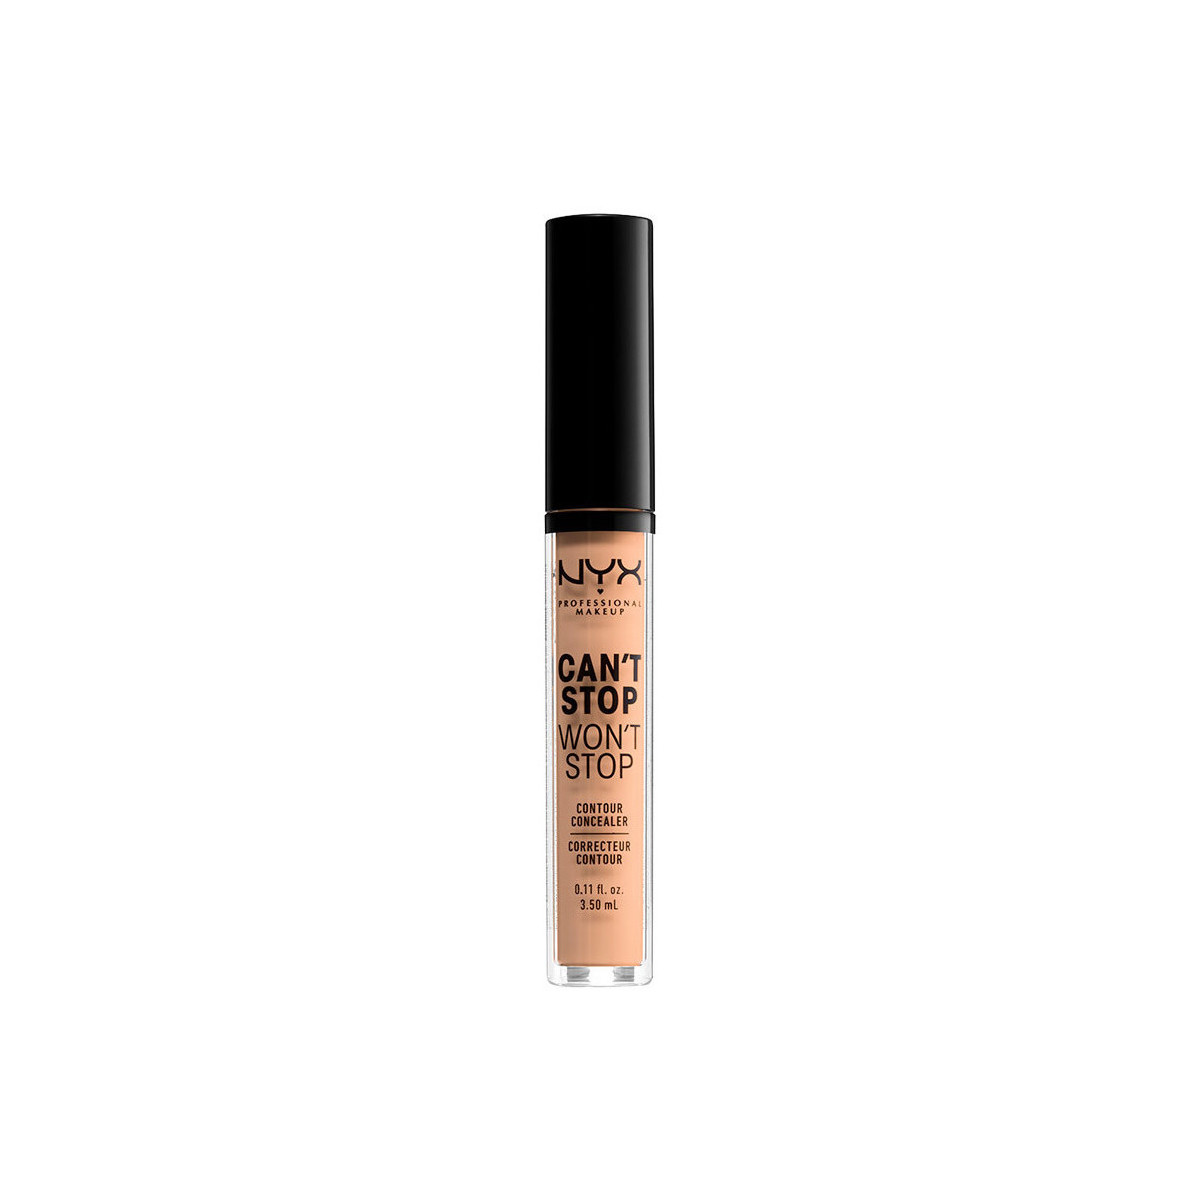 Beauty Make-up & Foundation  Nyx Professional Make Up Can't Stop Won't Stop Contour Concealer natural 